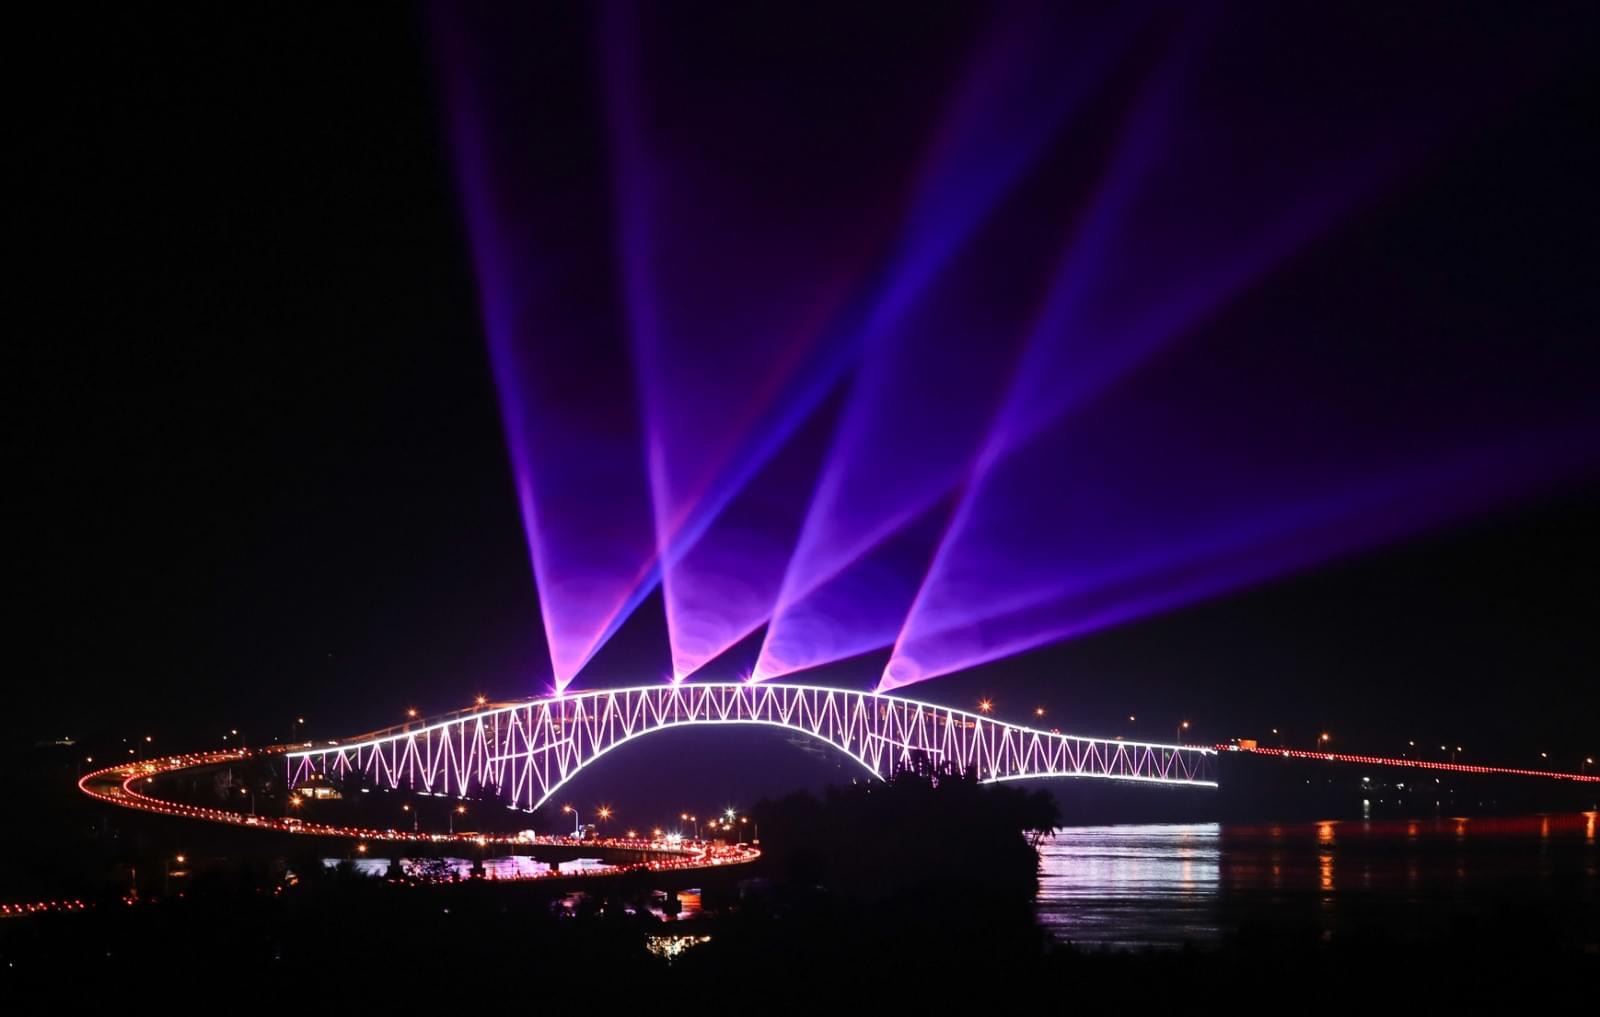 This Free Light Show at The San Juanico Bridge Will Take Your Breath Away